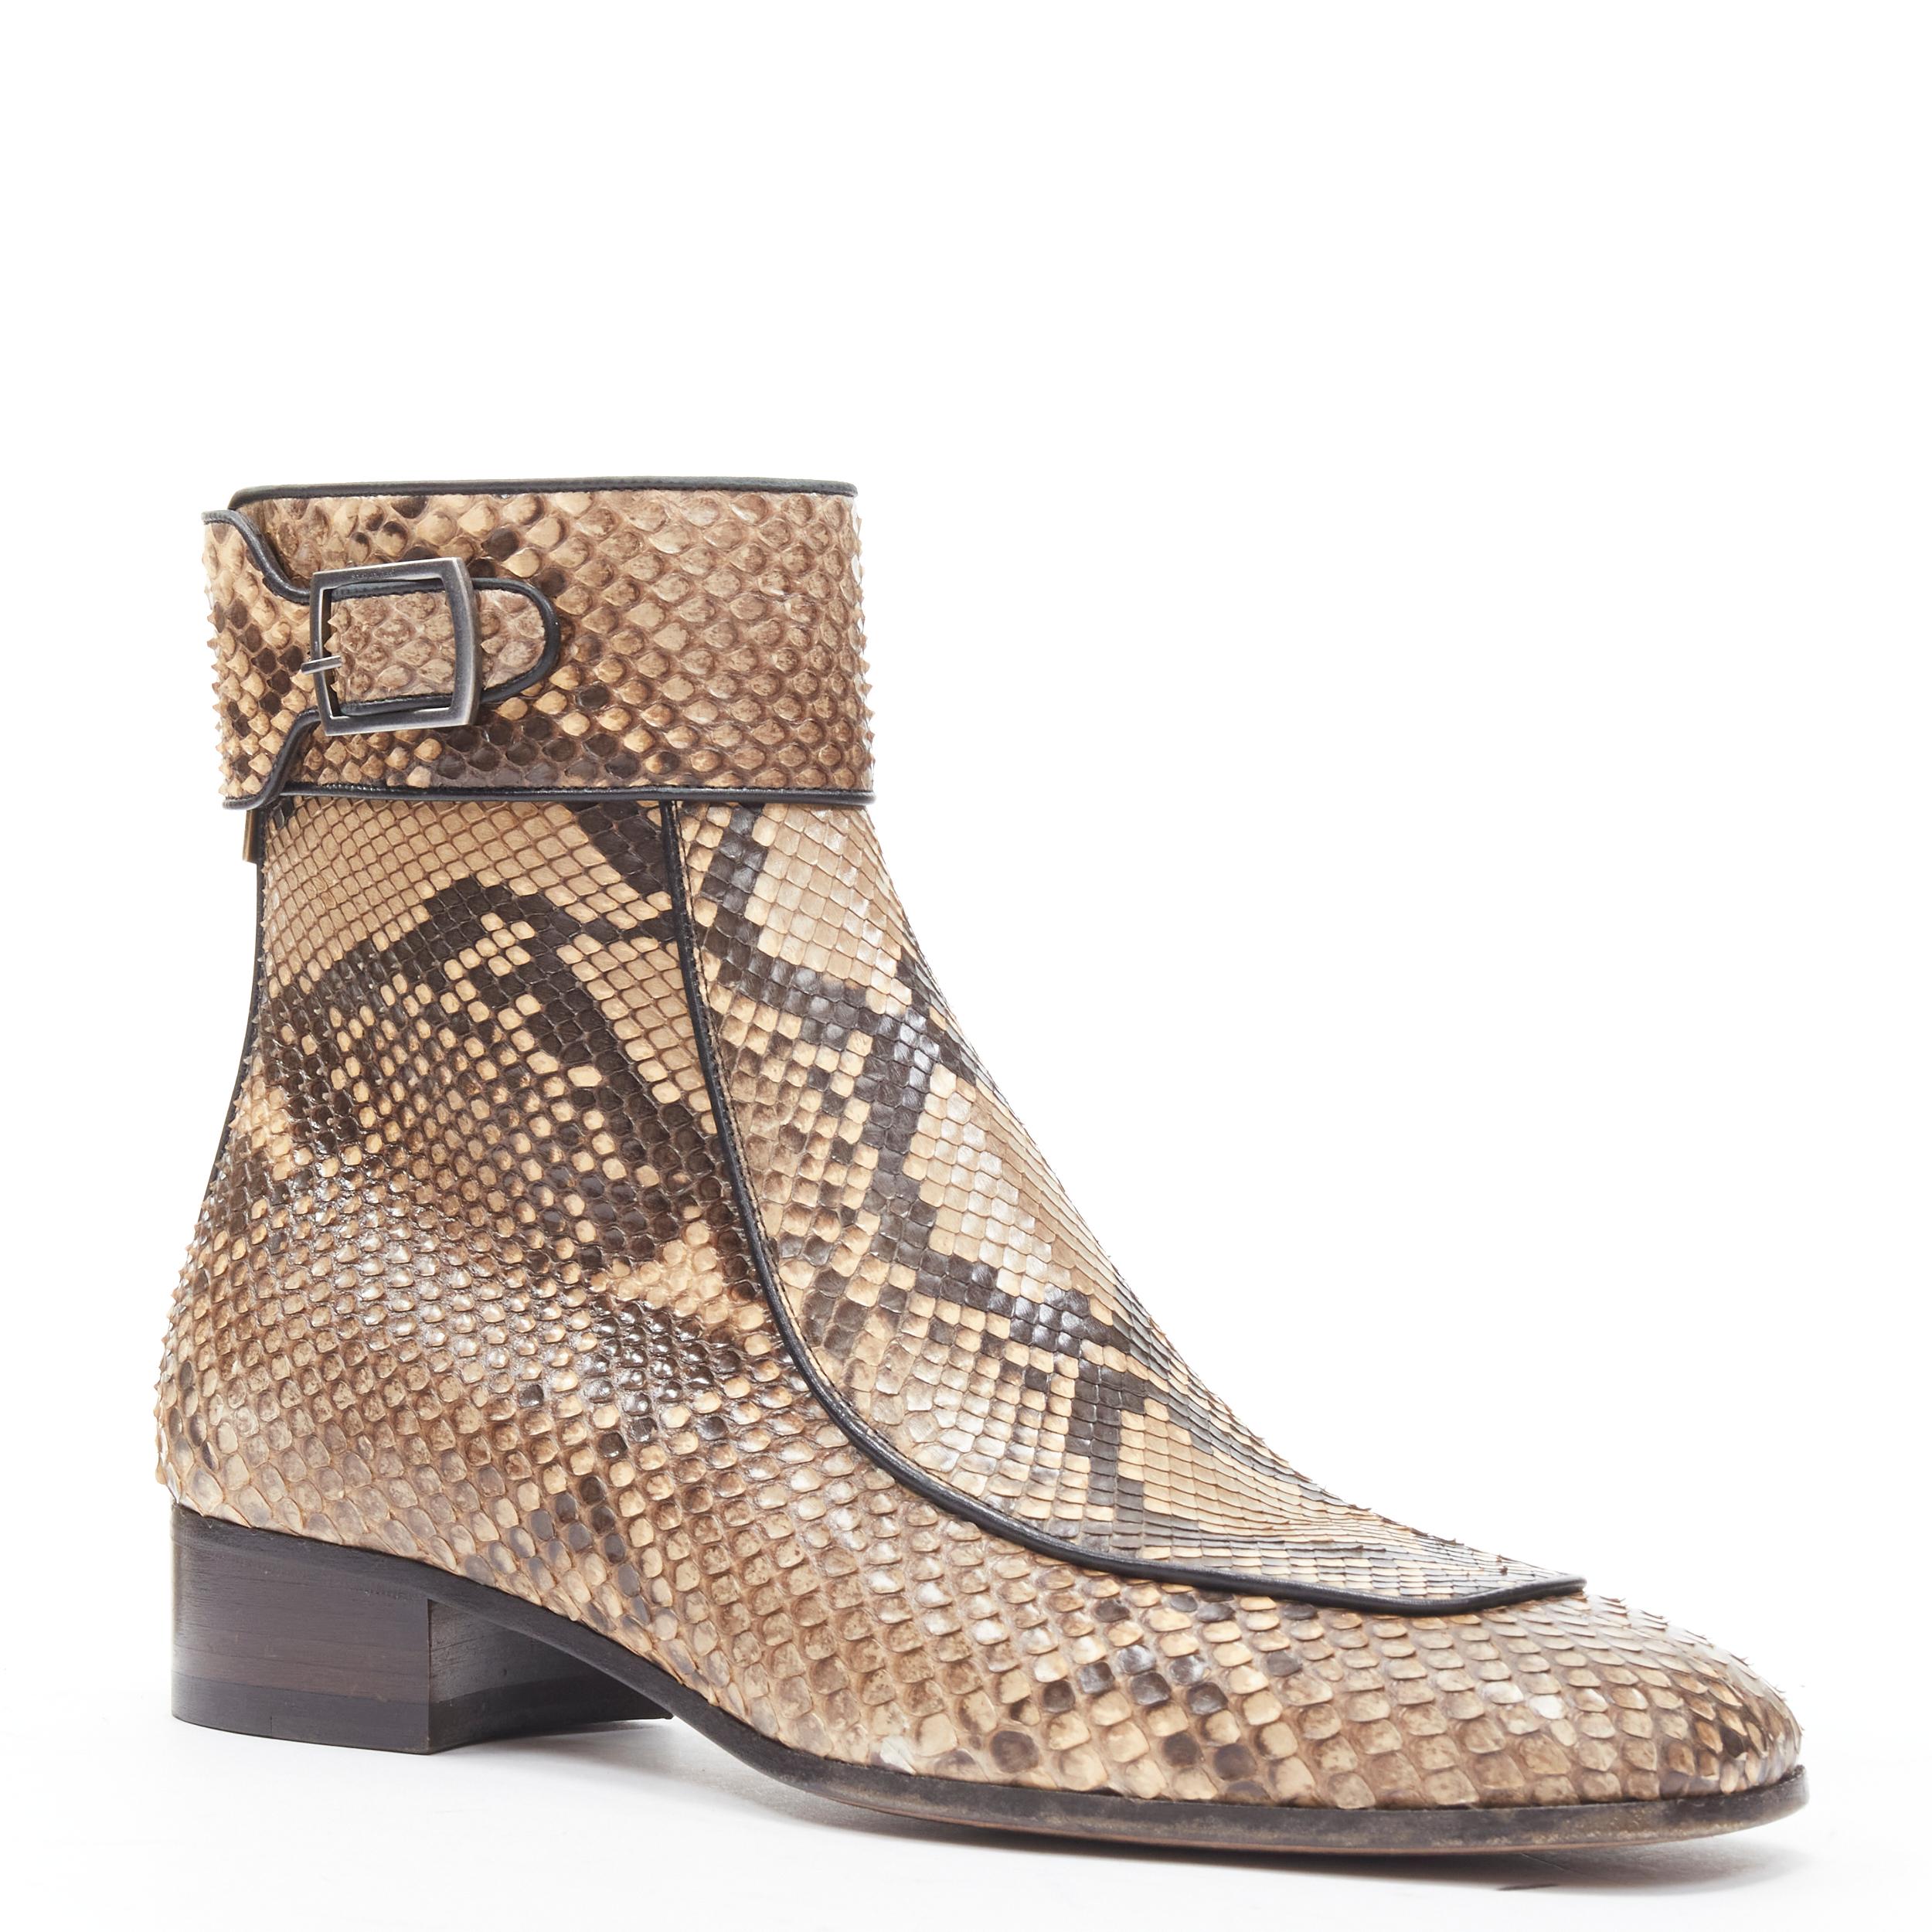 new SAINT LAURENT Miles 30 Zip python snake square toe buckle boot EU42 
Reference: TGAS/B01770 
Brand: Saint Laurent 
Collection: Fall Winter 2019 Runway 
Material: Snakeskin 
Color: Beige 
Pattern: Solid 
Closure: Zip 
Extra Detail: Intentionally